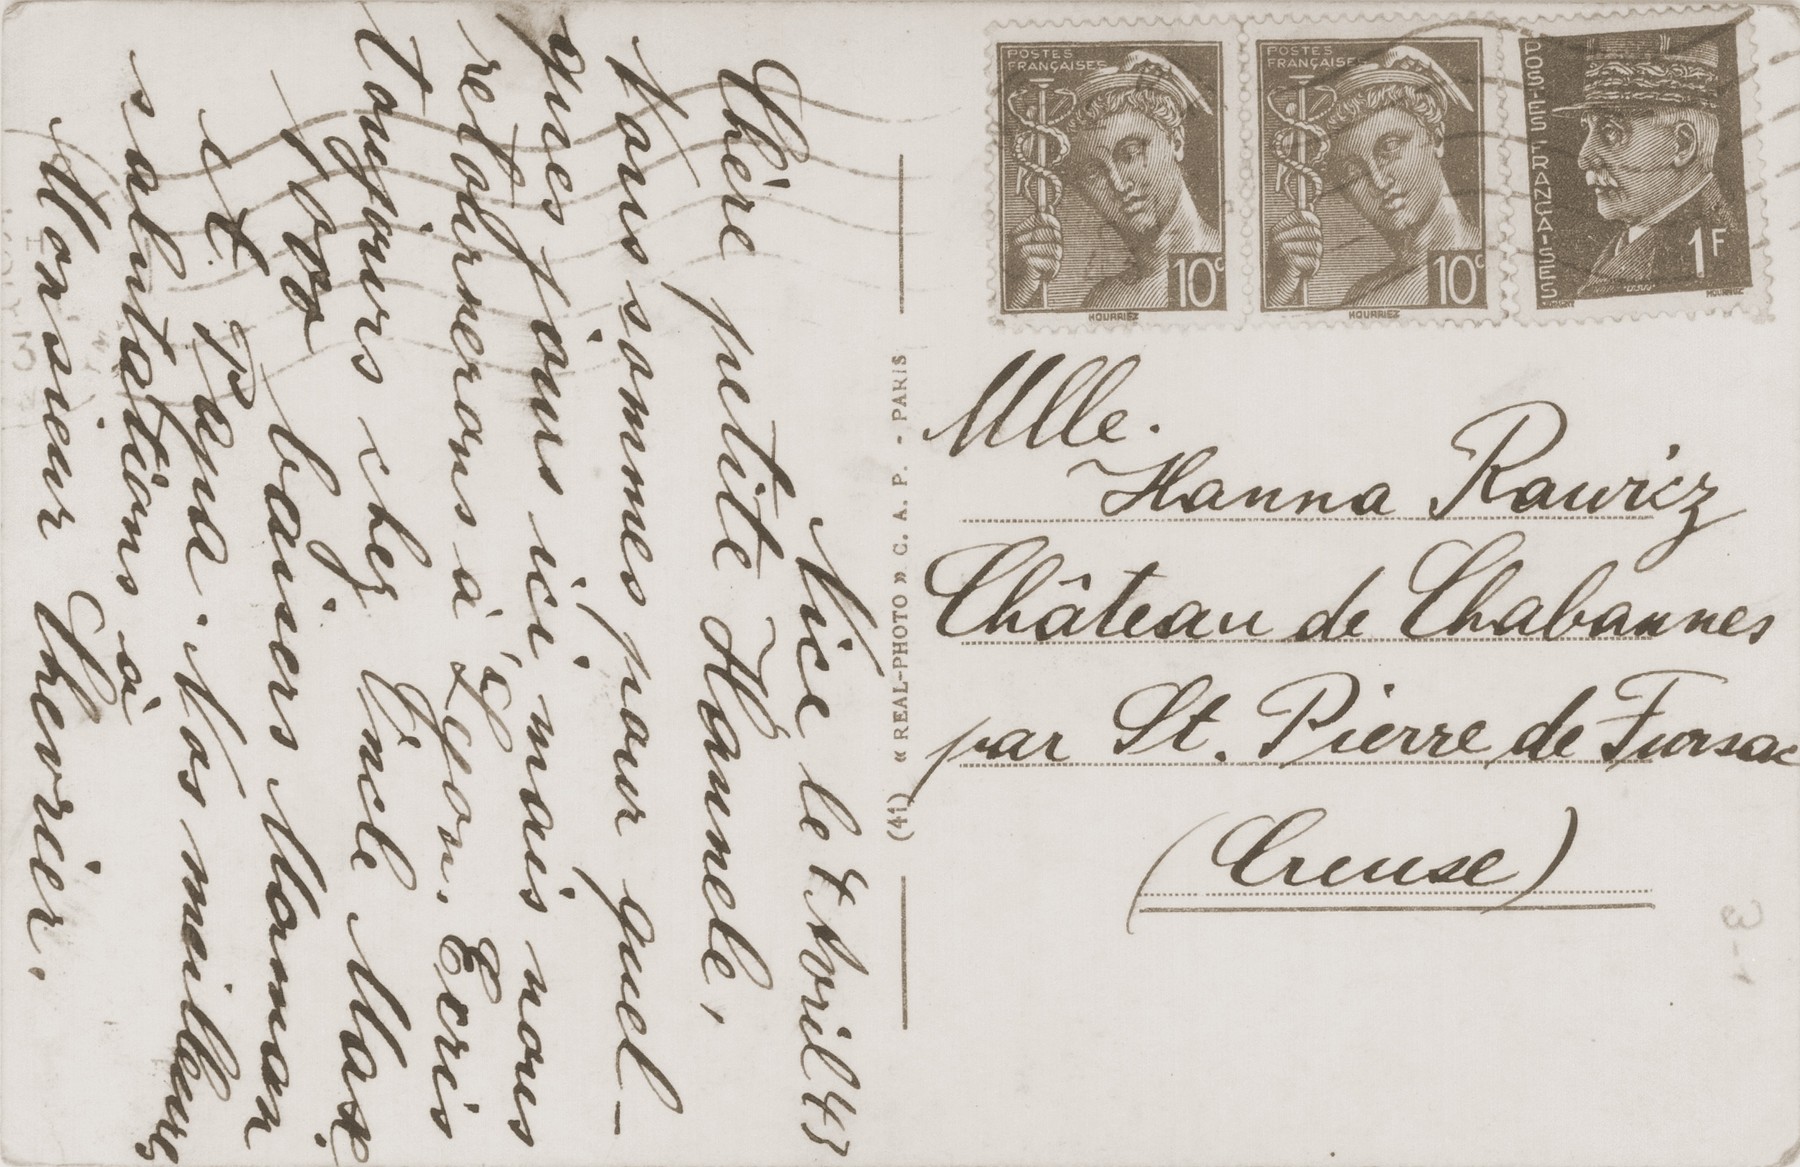 A postcard sent to Hanna Rawicz at the Château de Chabannes by her parents in Nice.